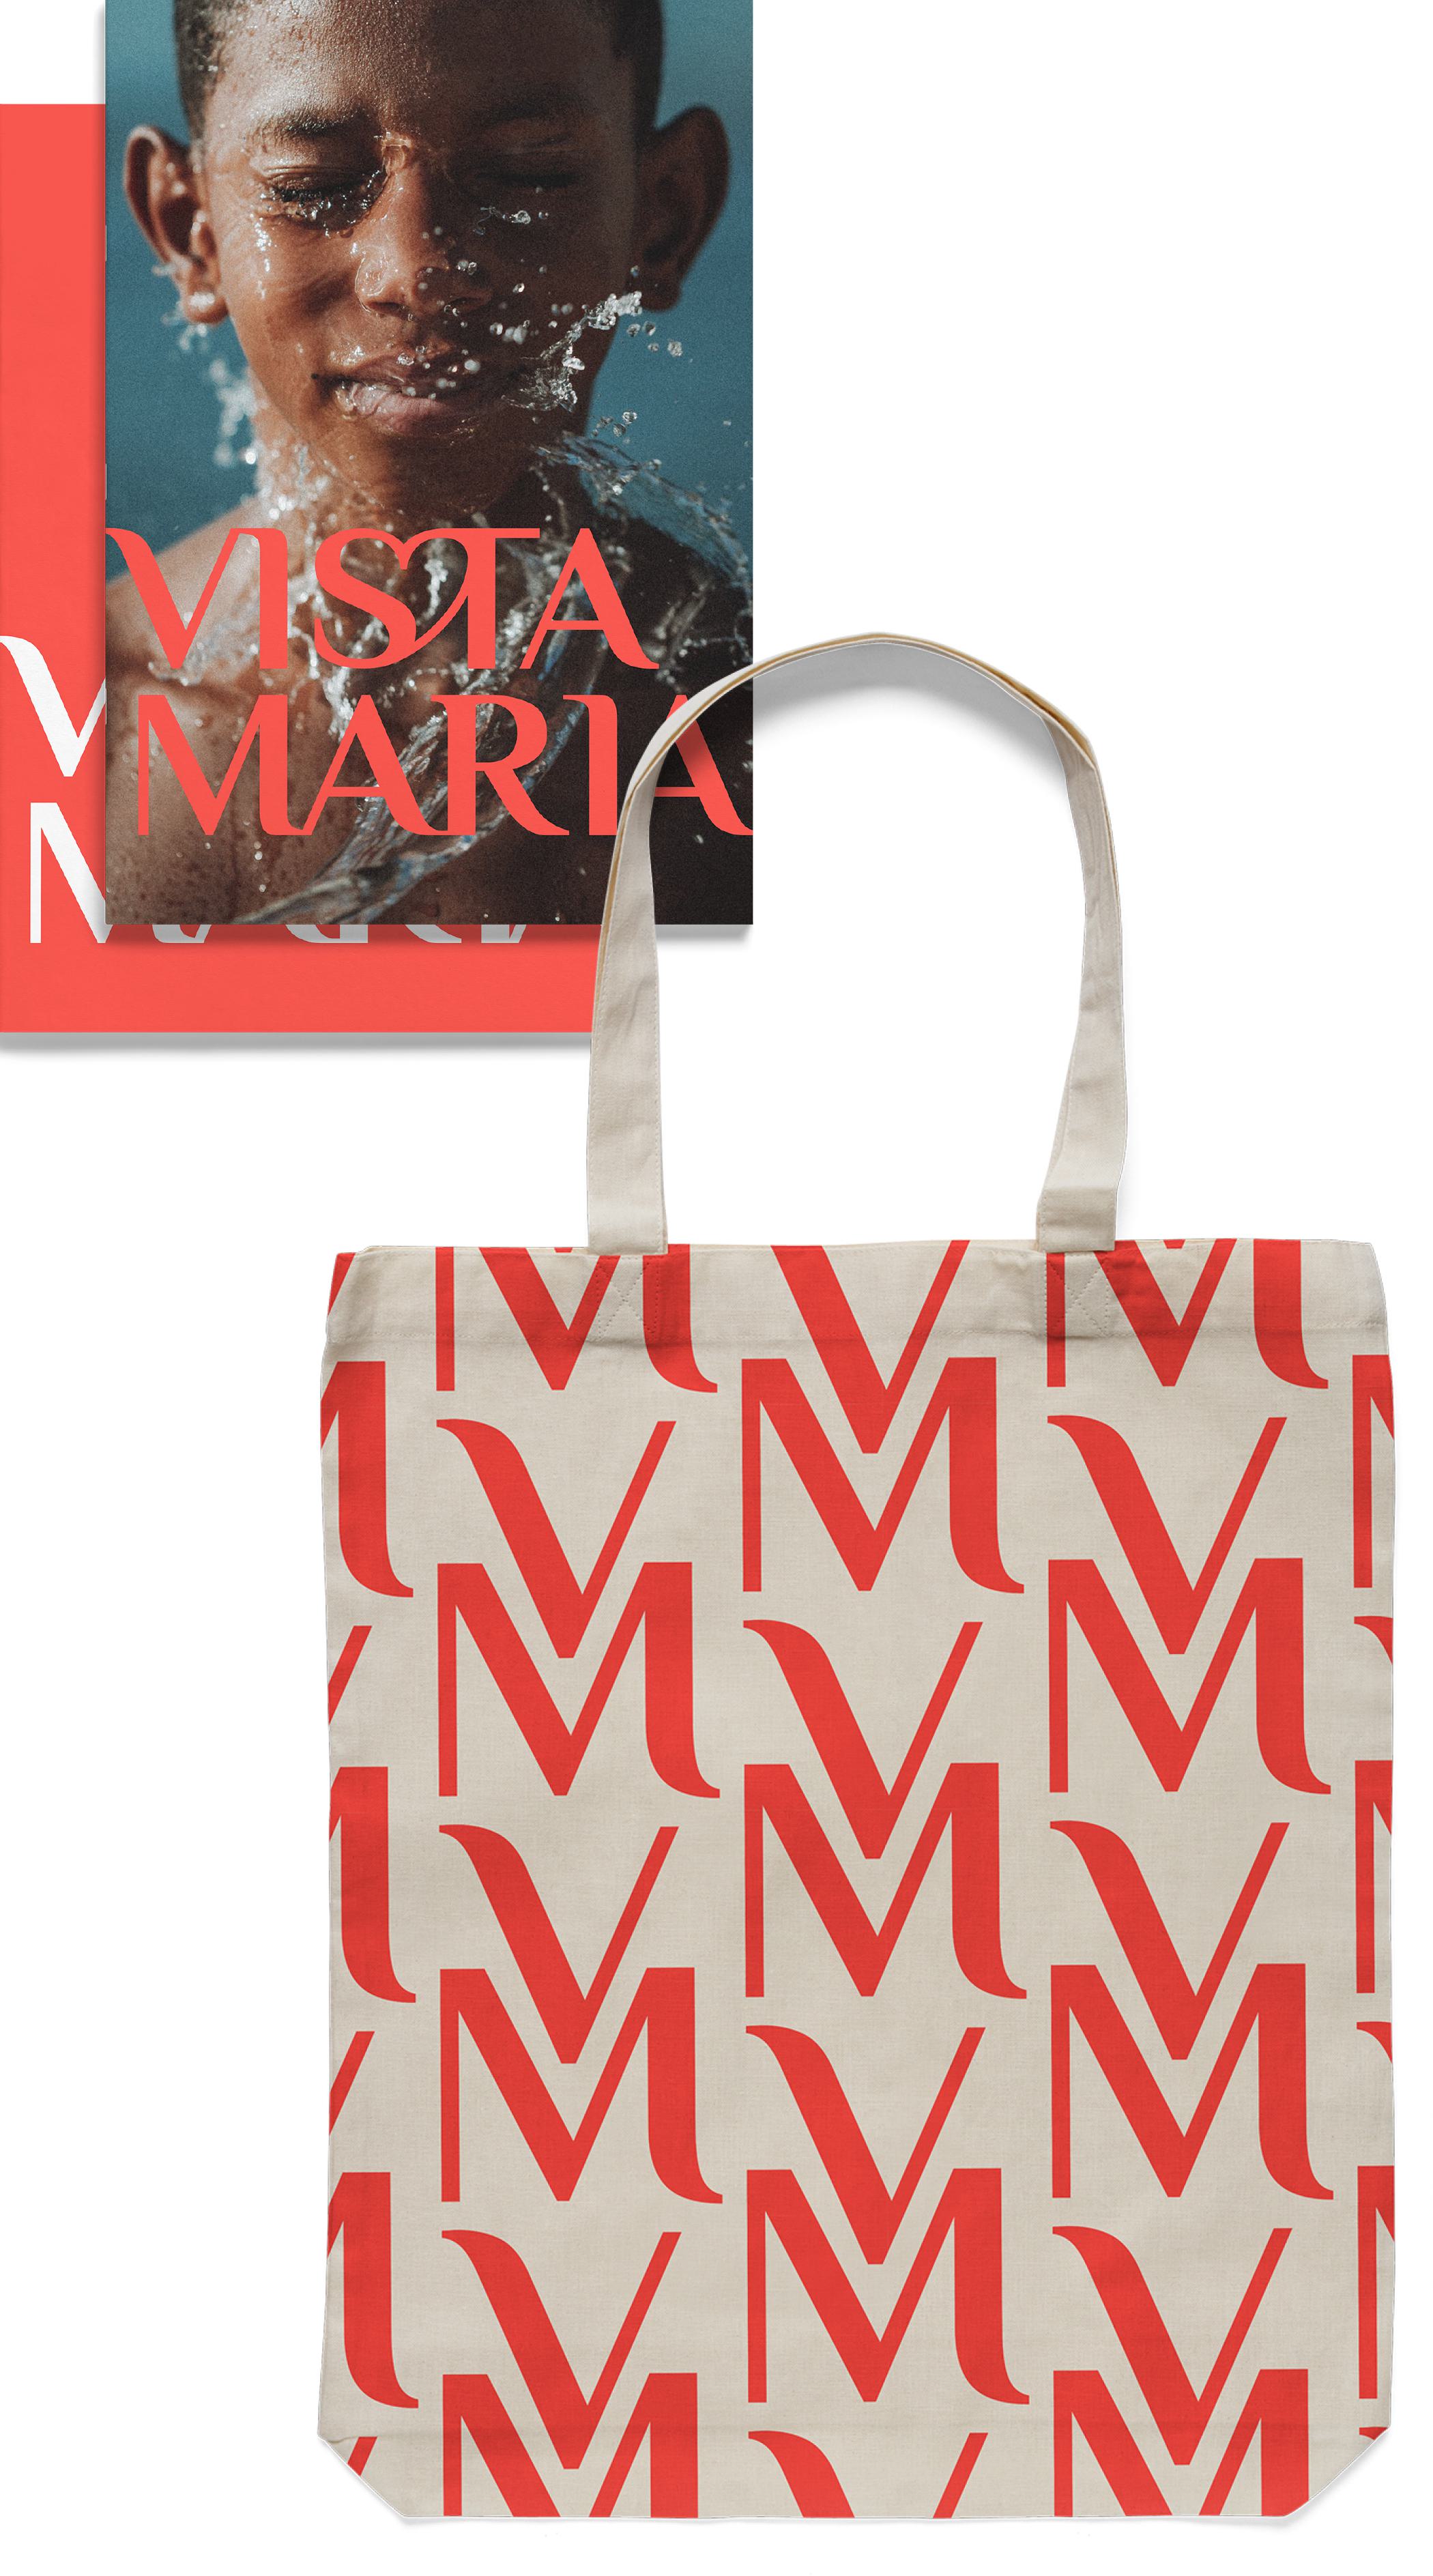 A variety of Vista Maria logo printed goods: books, round pins, and an eco bag.